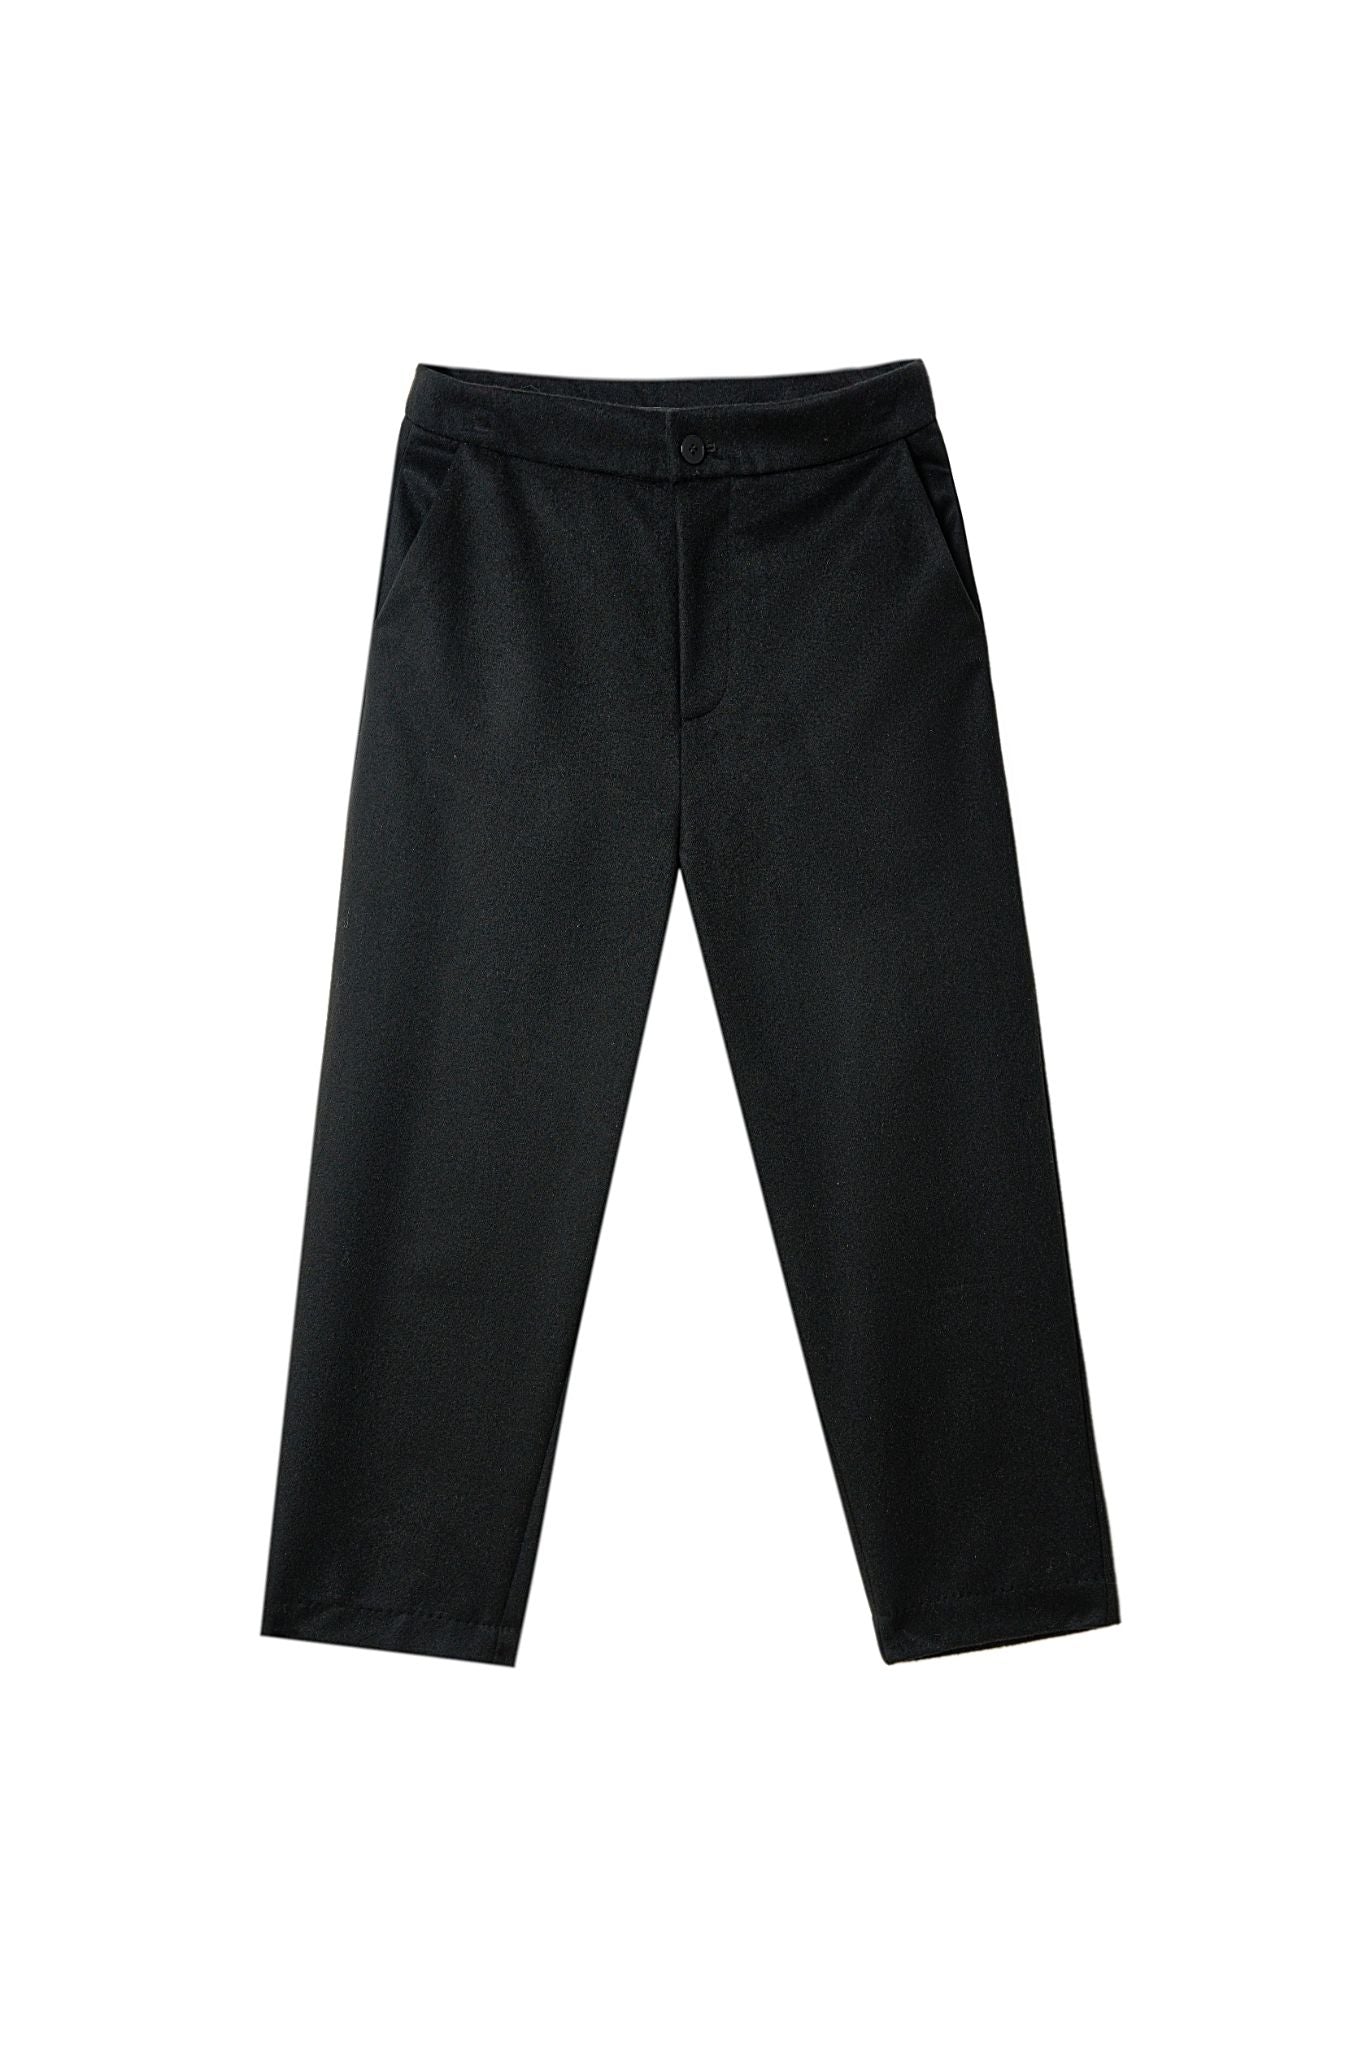 90% Wool 10% Cashmere Slim Fit Black Casual Pants for Women